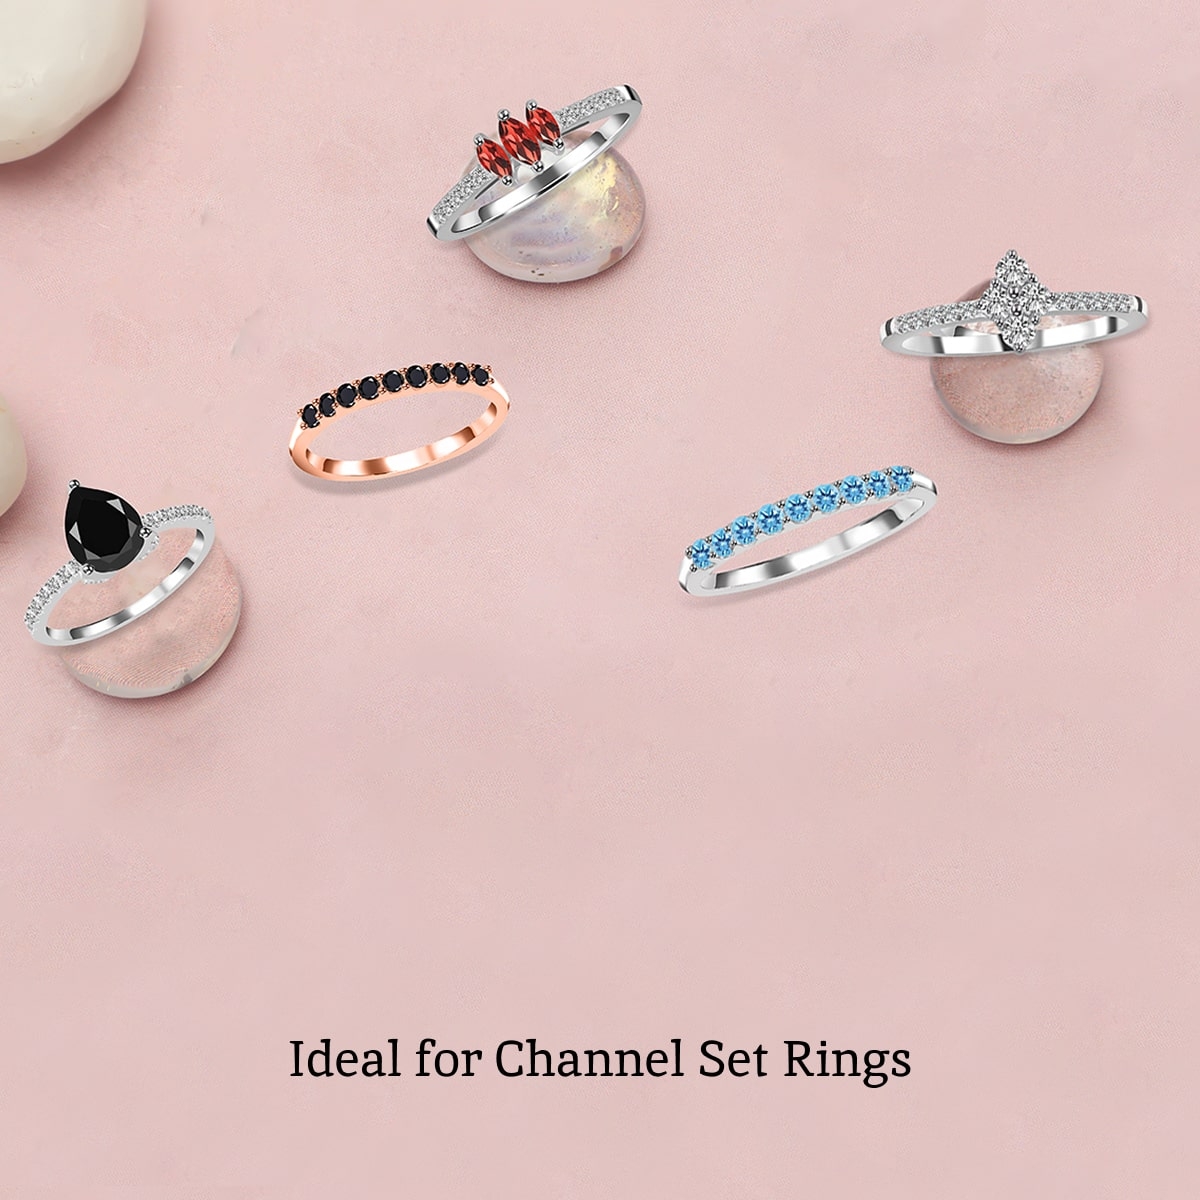 Who should choose a channel set ring